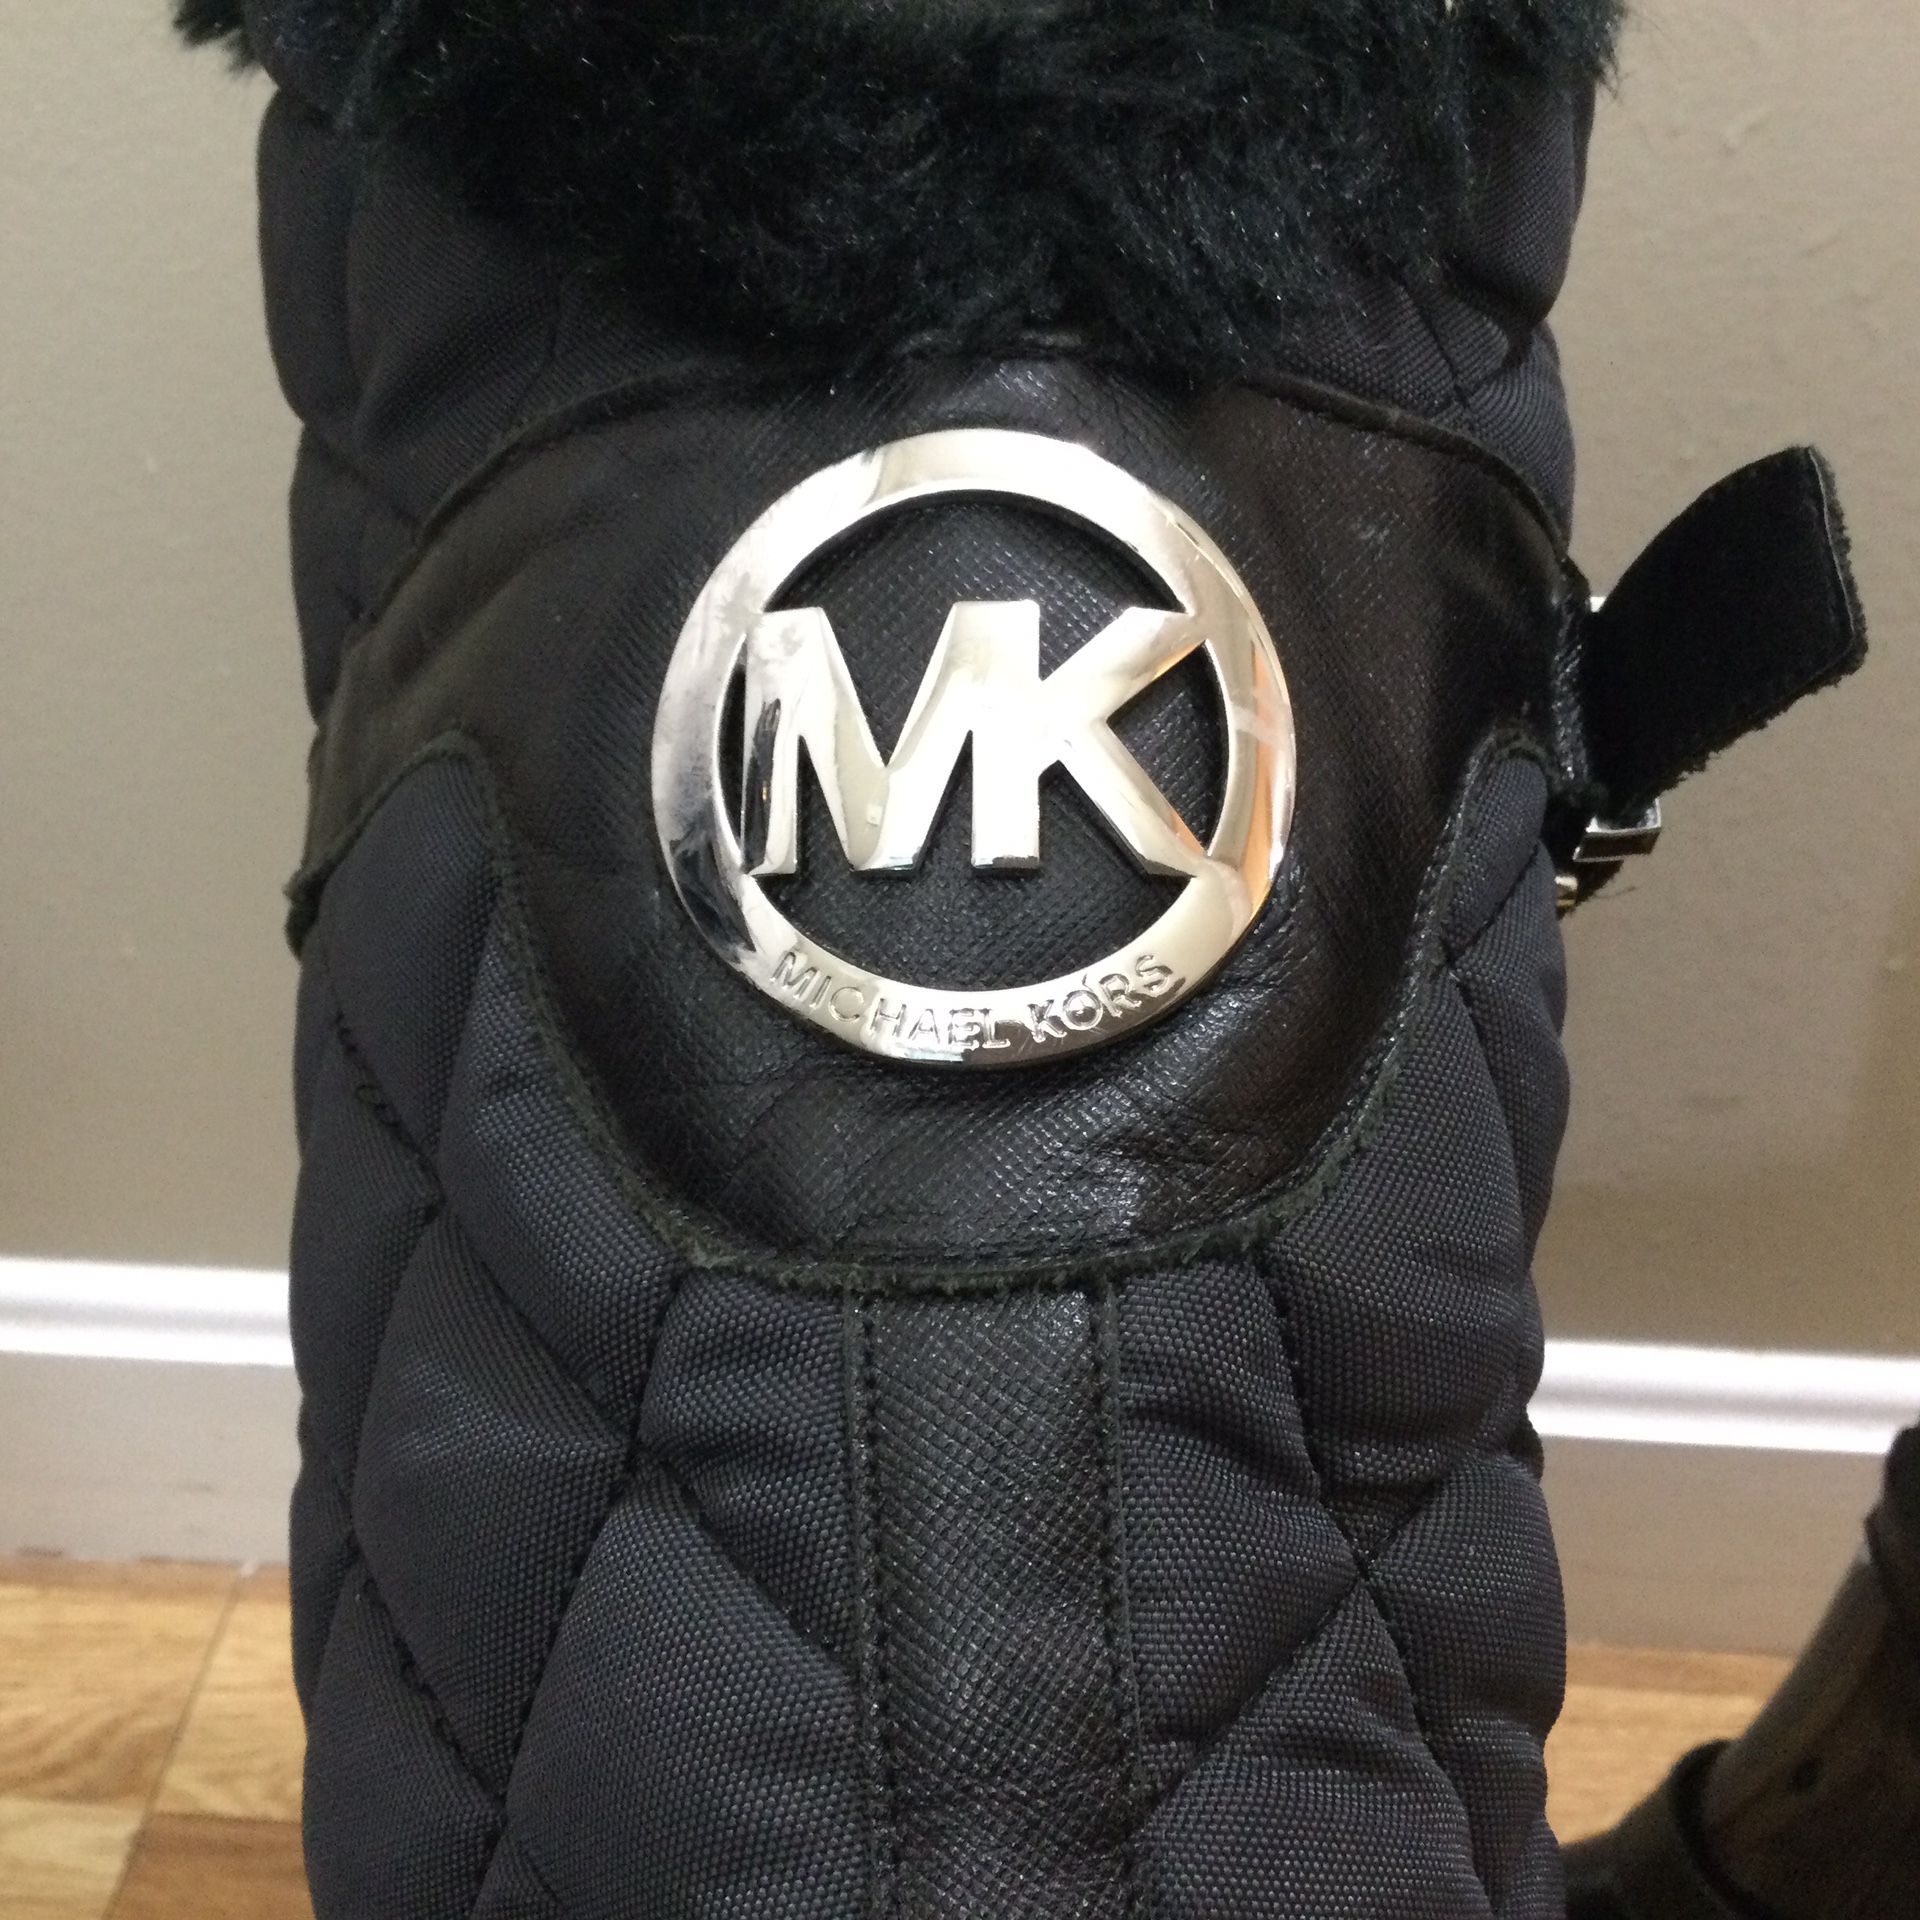 Michael Kors Fulton Quilted Rain/Snow Boots 